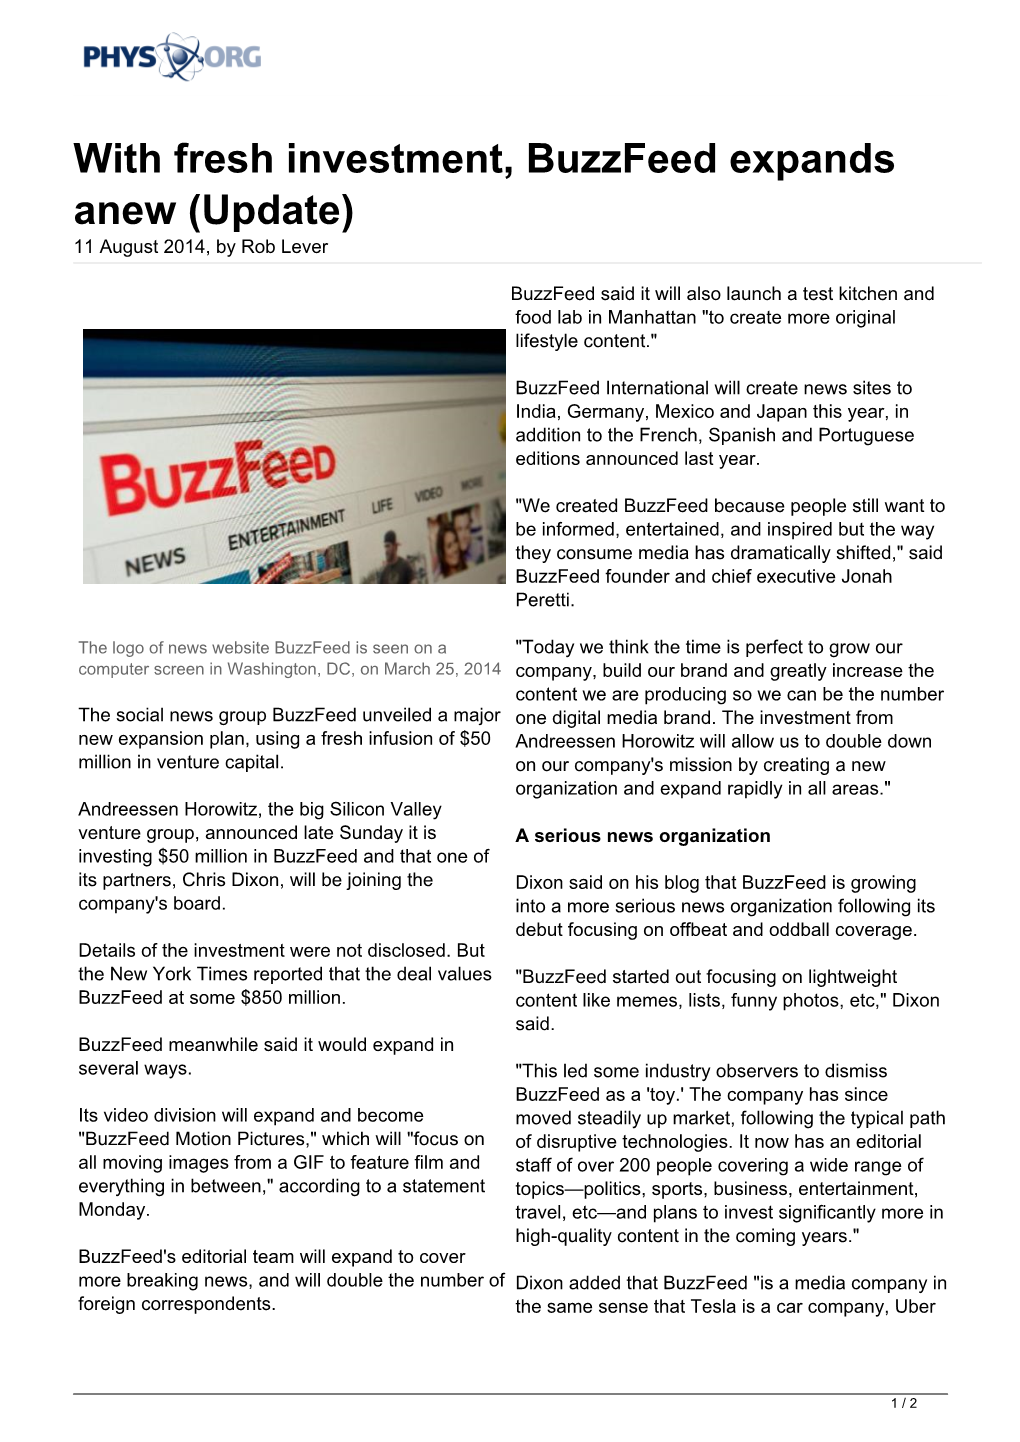 With Fresh Investment, Buzzfeed Expands Anew (Update) 11 August 2014, by Rob Lever